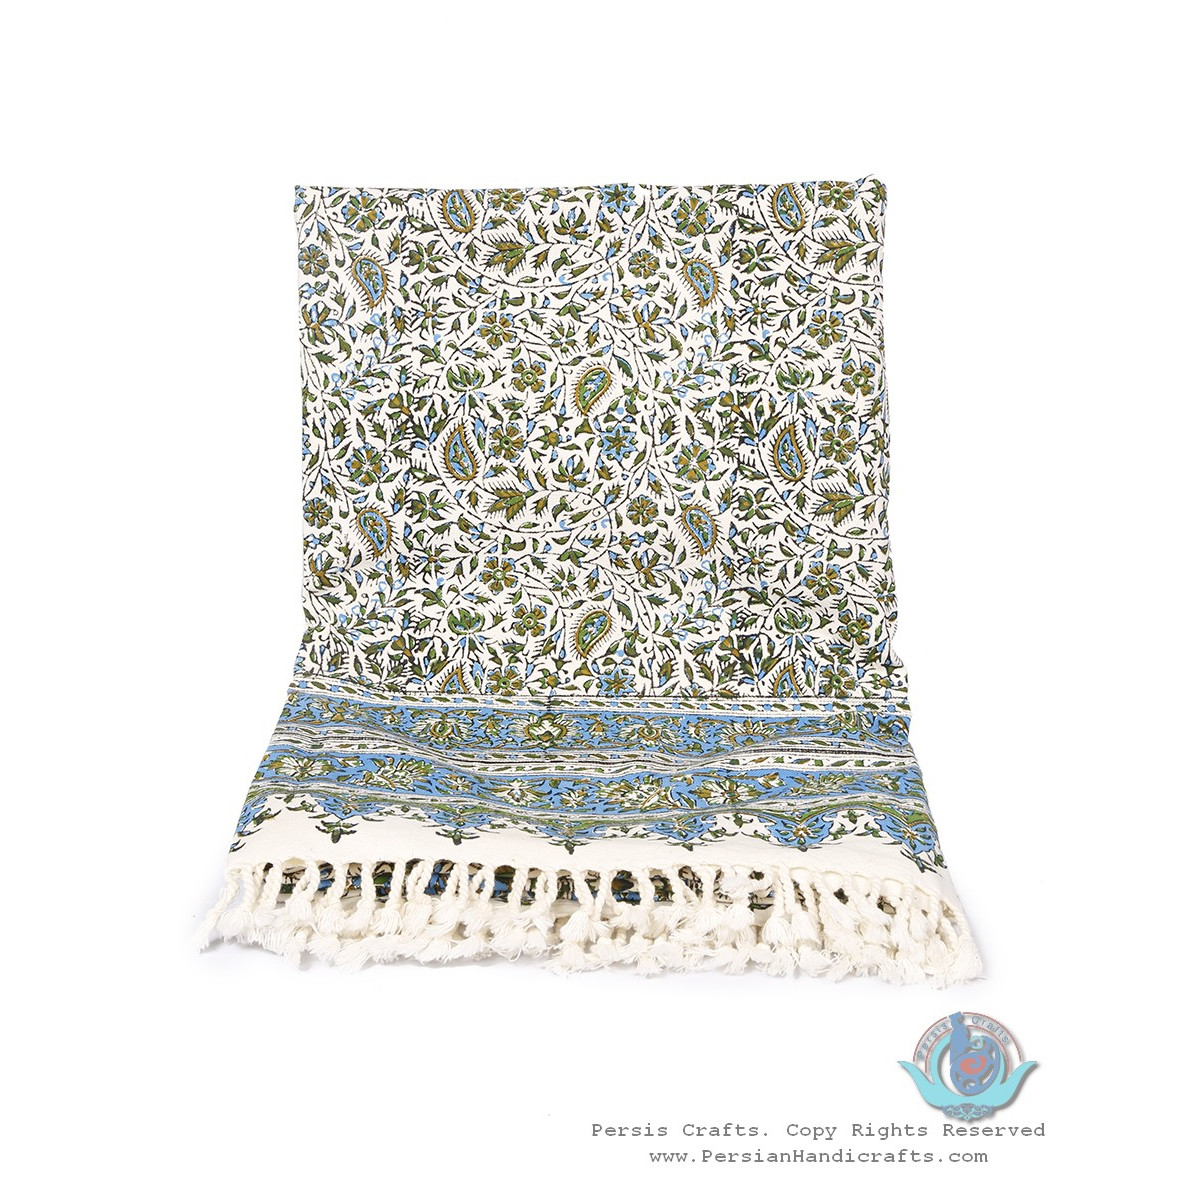 Persian Tapestry Paisley & Flower Ghalamkar Bedspread or Tablecloth - HGH3908-Persian Handicrafts